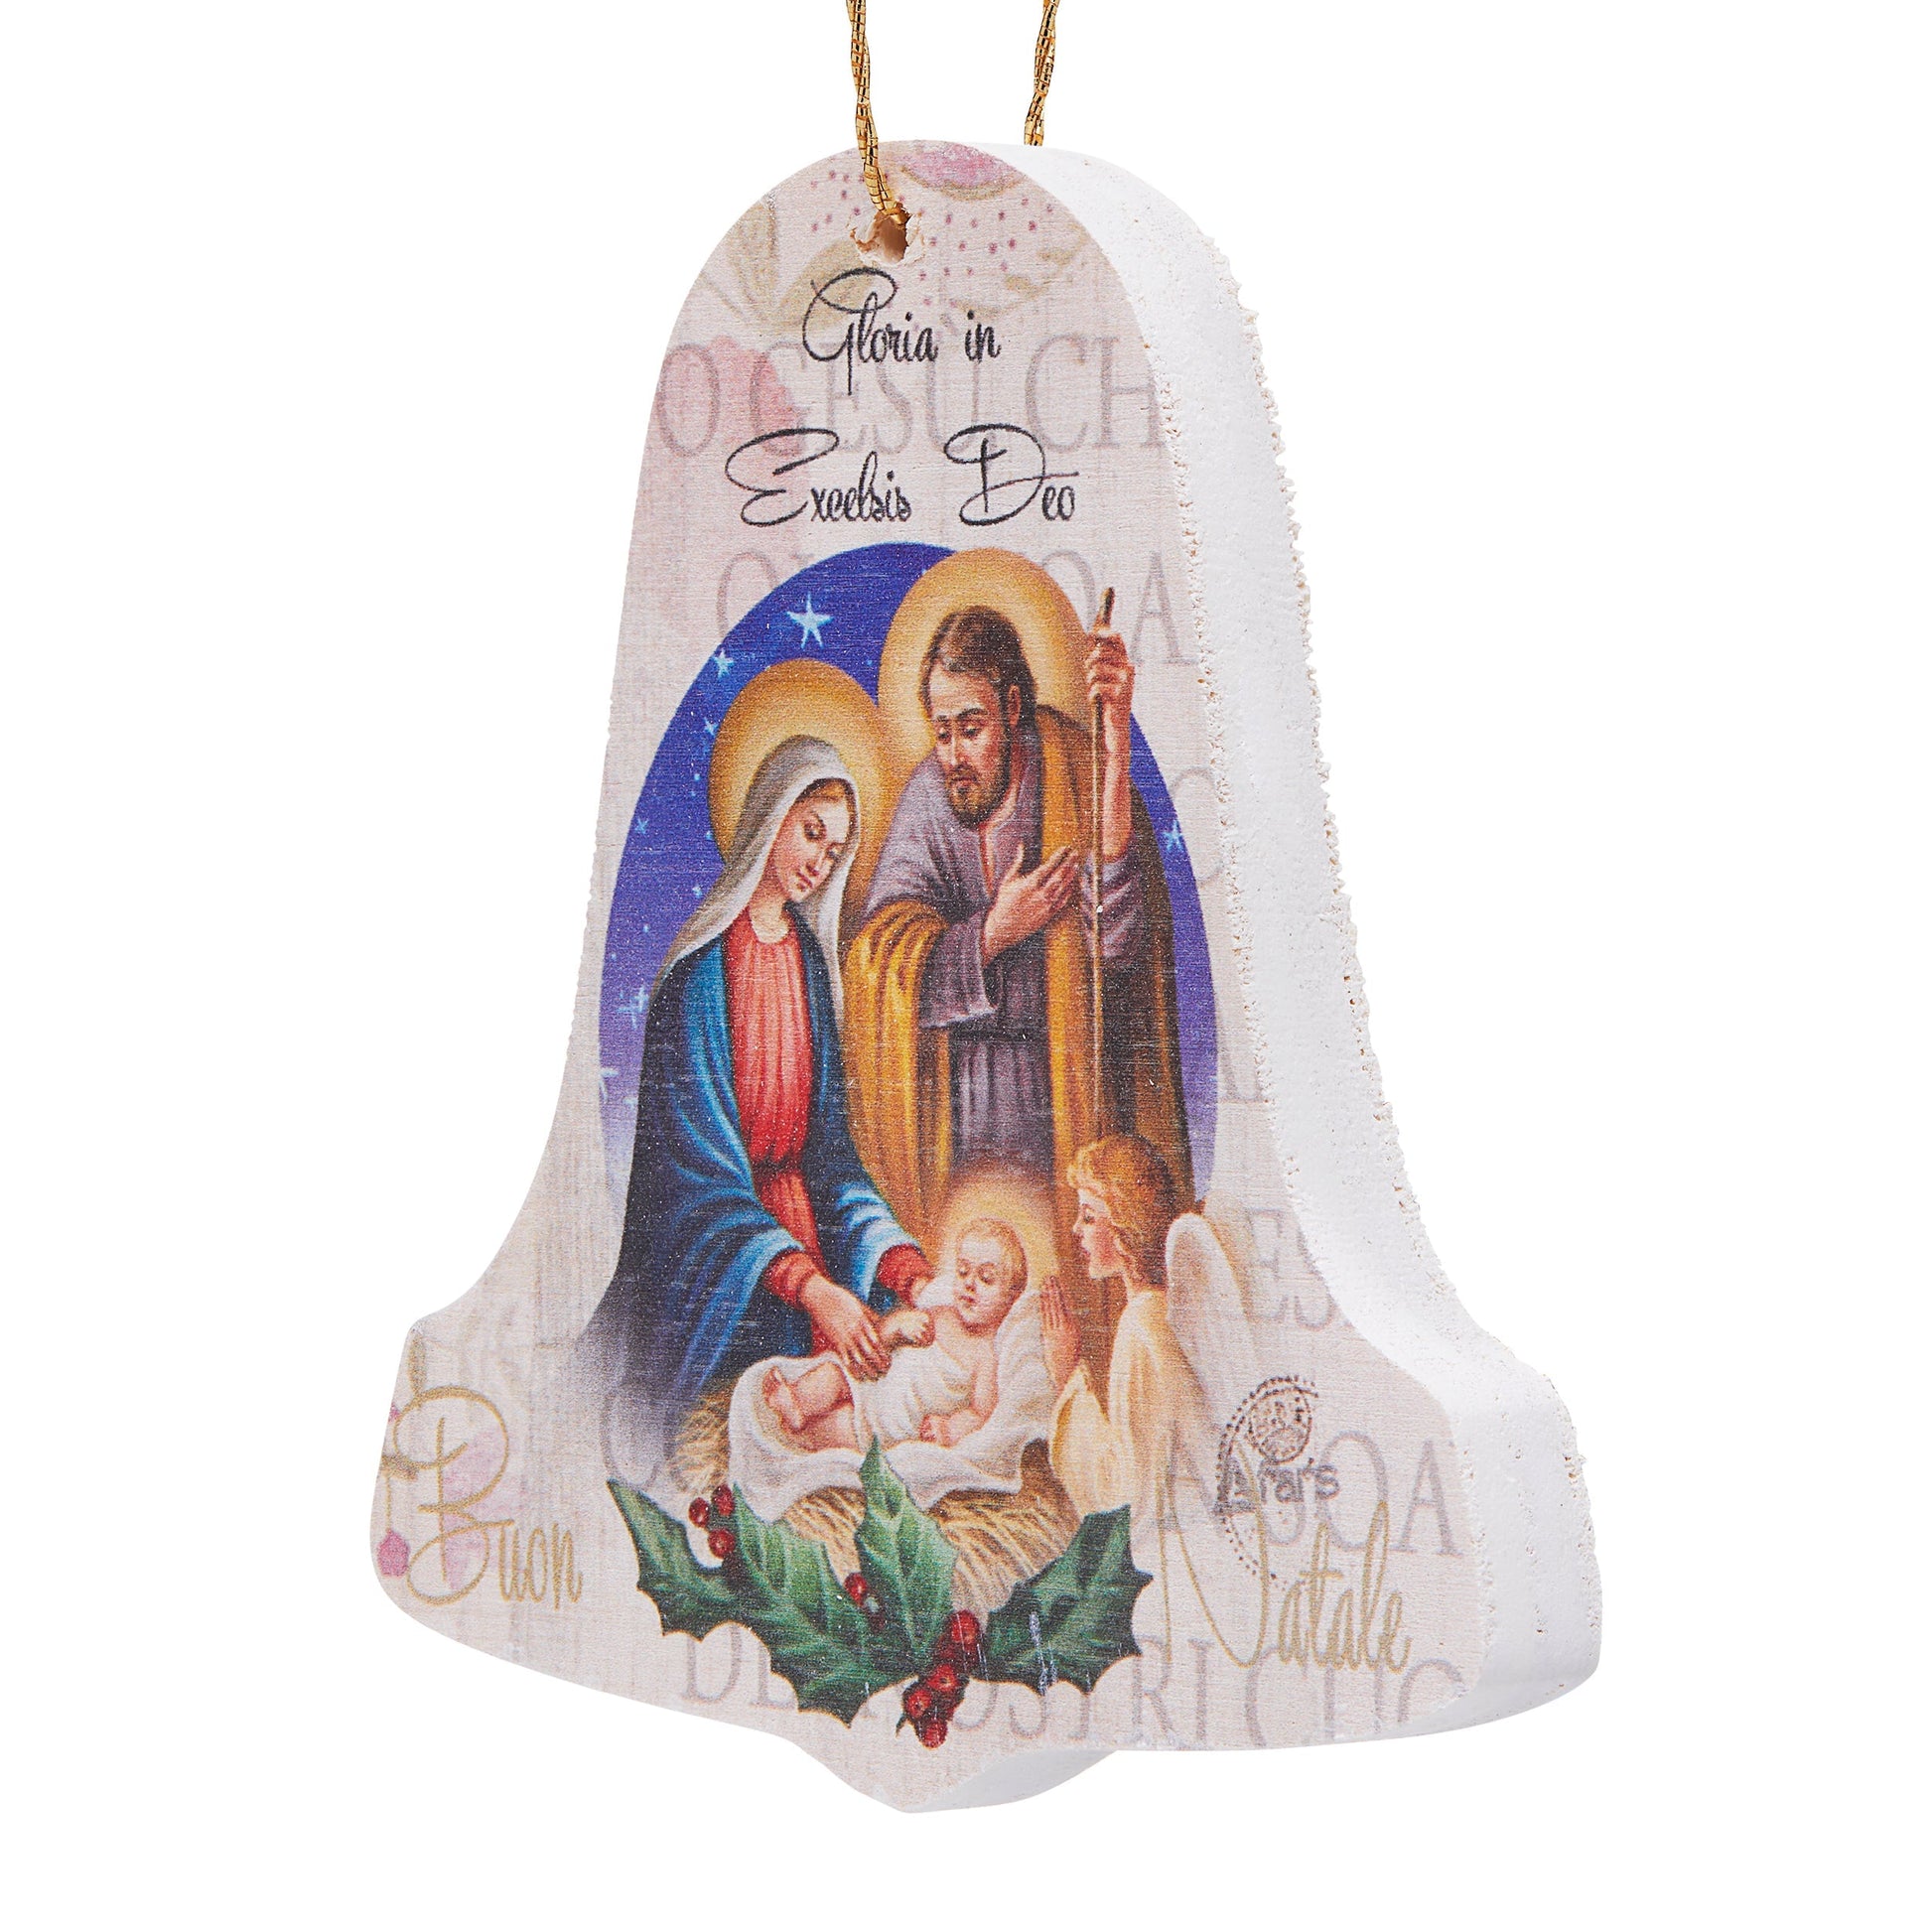 Mondo Cattolico 8 cm (3.15 in) Wooden Bell-shaped Christmas Decoration With Nativity Scene